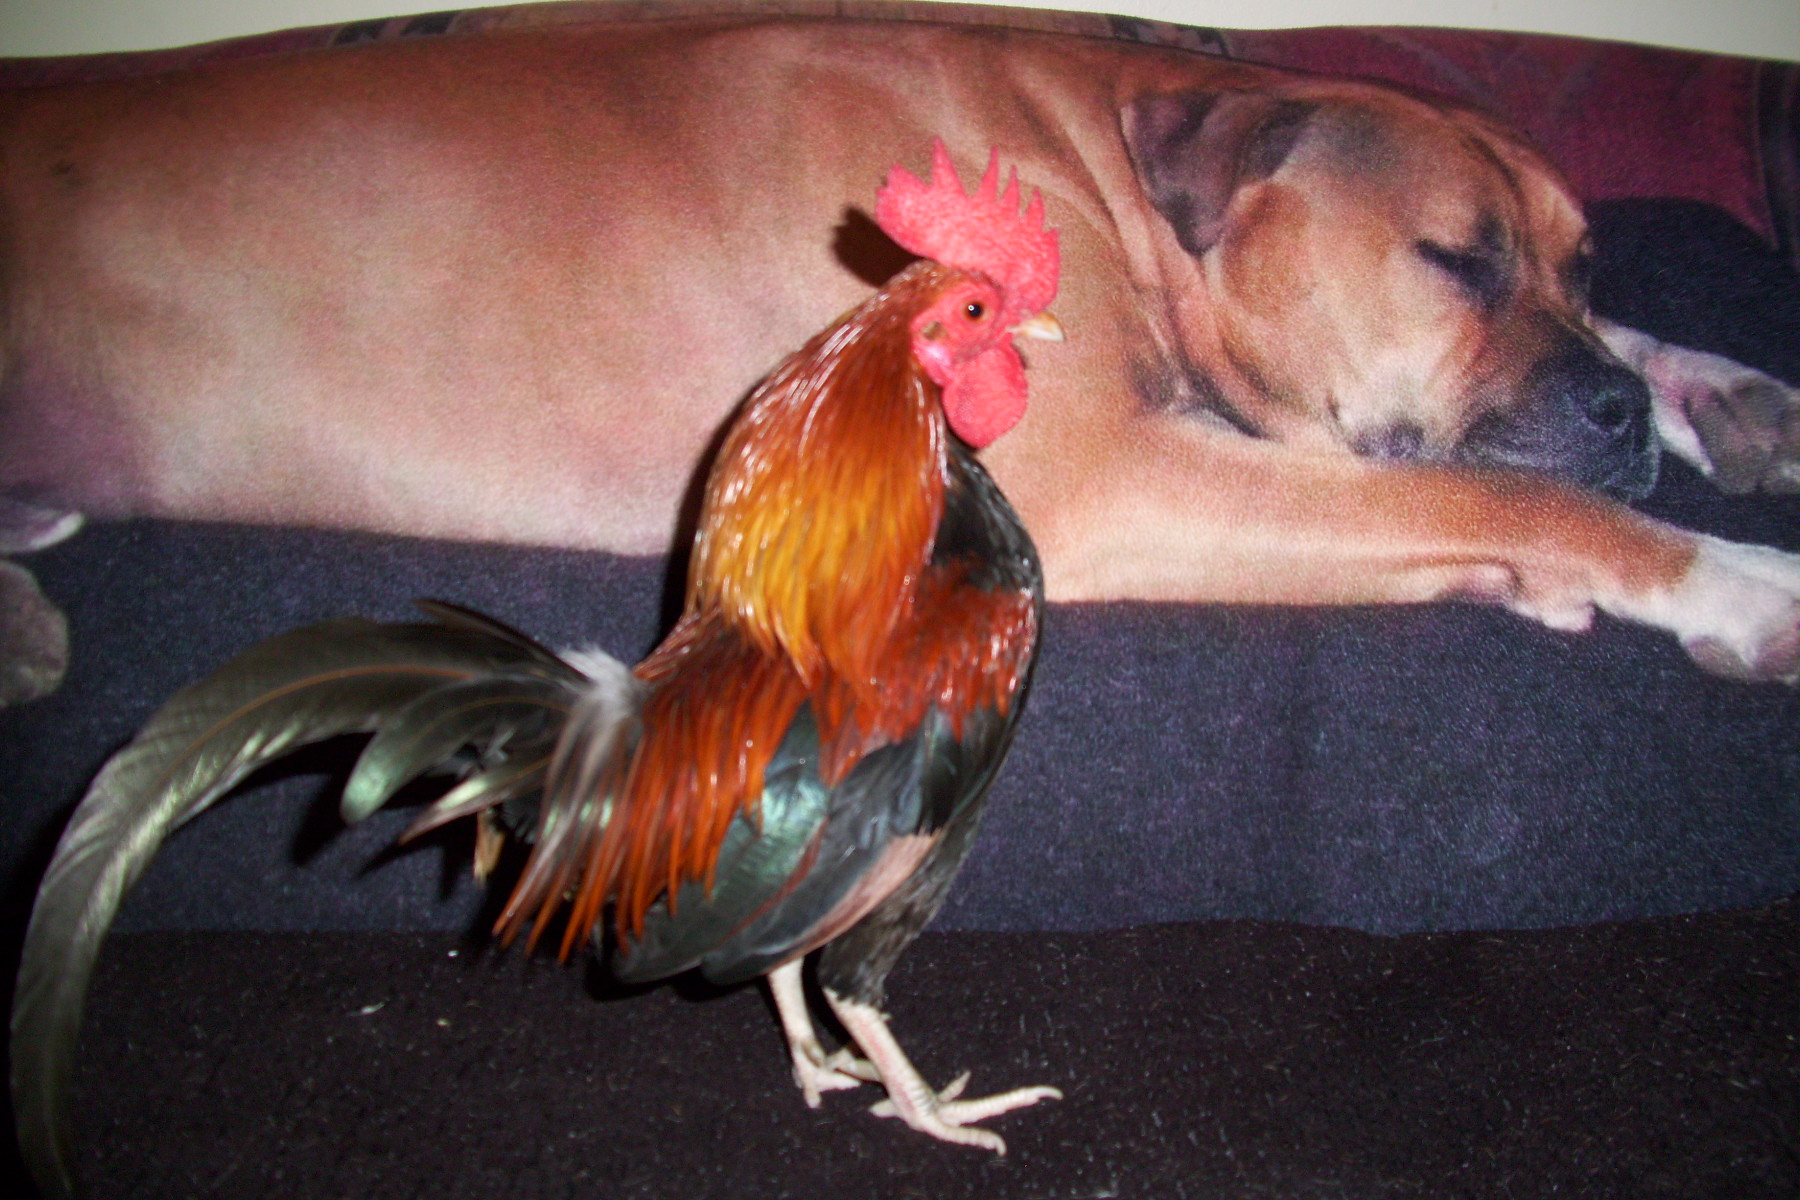 Sreech, my Old English Game Bantam and his playmate Joe, 100 lb. Bull Mastiff...Screech is at the top of the pecking order regardless of the weight and species differences. Comical and sweet!